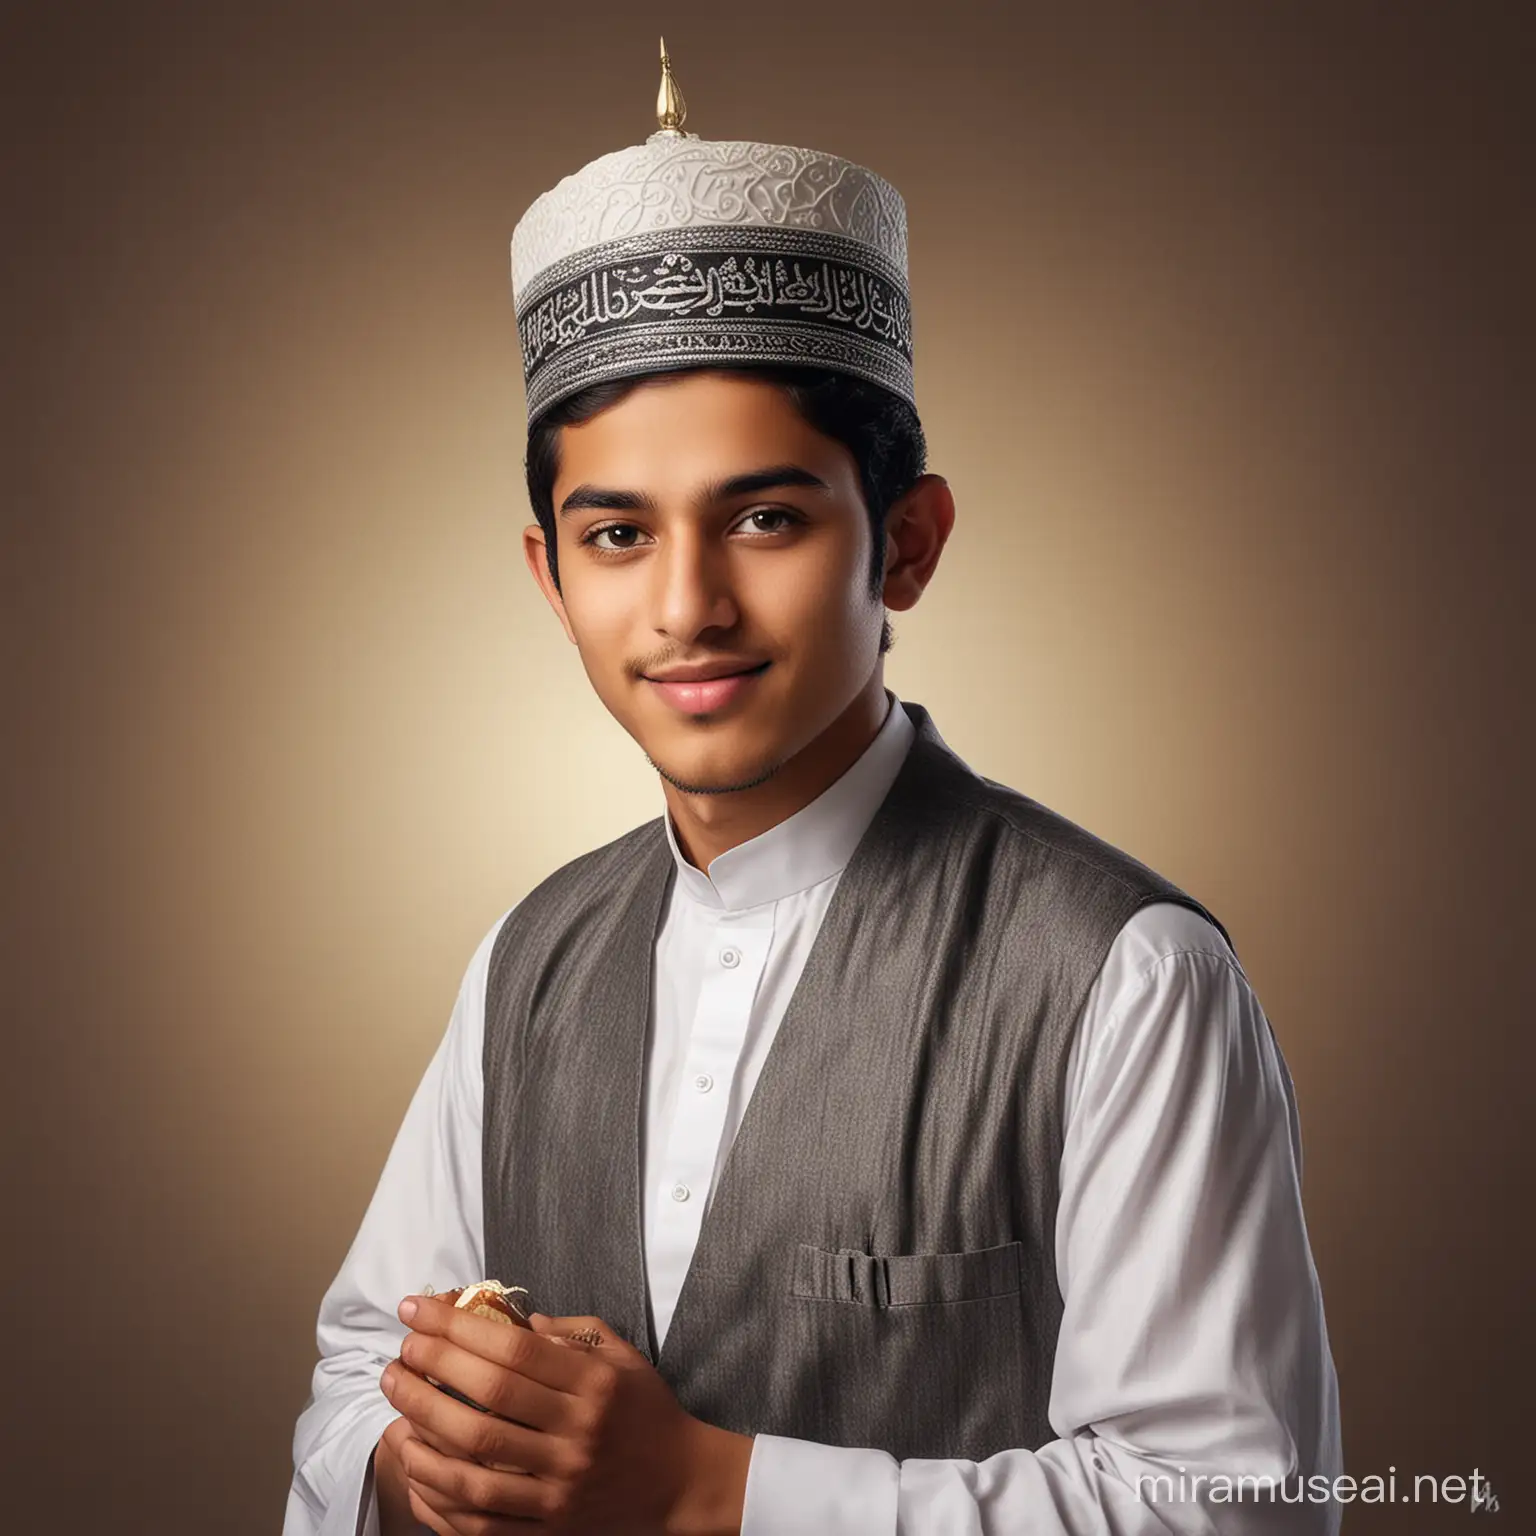 foto asli "Craft a realistic photo featuring a 21-year-old Pakistani boy elegantly dressed in Islamic attire, including an Islamic cap. Enhance the cultural richness by incorporating the backdrop with the heartfelt message '18th Fasting Mubarak ❤️.' Imprint a touch of authenticity and innovation by applying the name "Jendol" to this meaningful image. Ensure the realistic style resonates with spirituality, tradition, and a blend of modernity in celebrating this special moment.